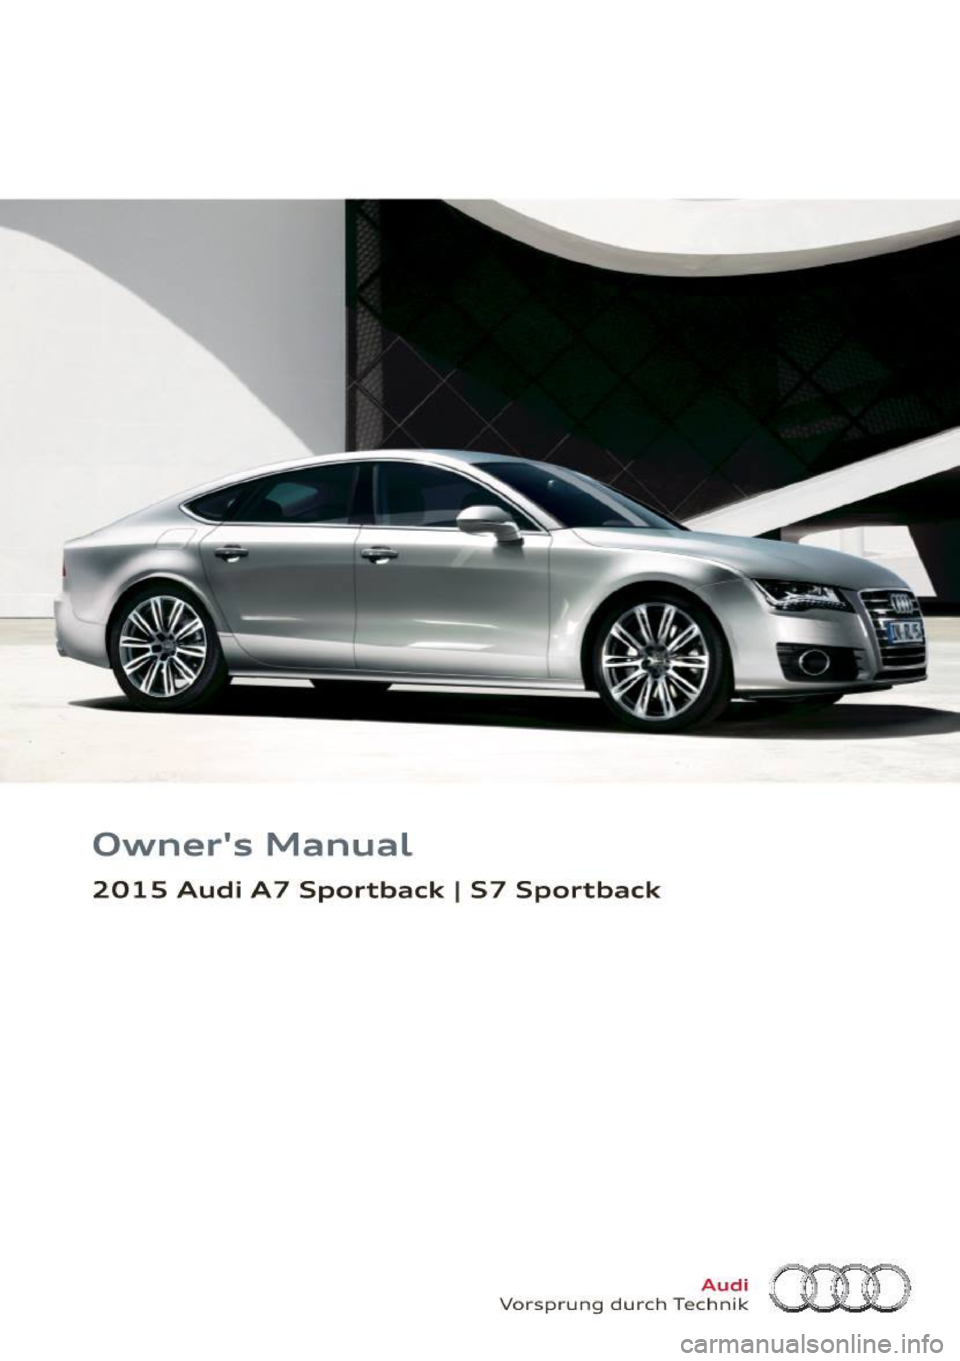 AUDI A7 2015  Owners Manual Owners  Manual 
2015  Audi  A7  Sportback I 57  Sportback 
Vorsprung durch Tee~~?~ ()[ID  